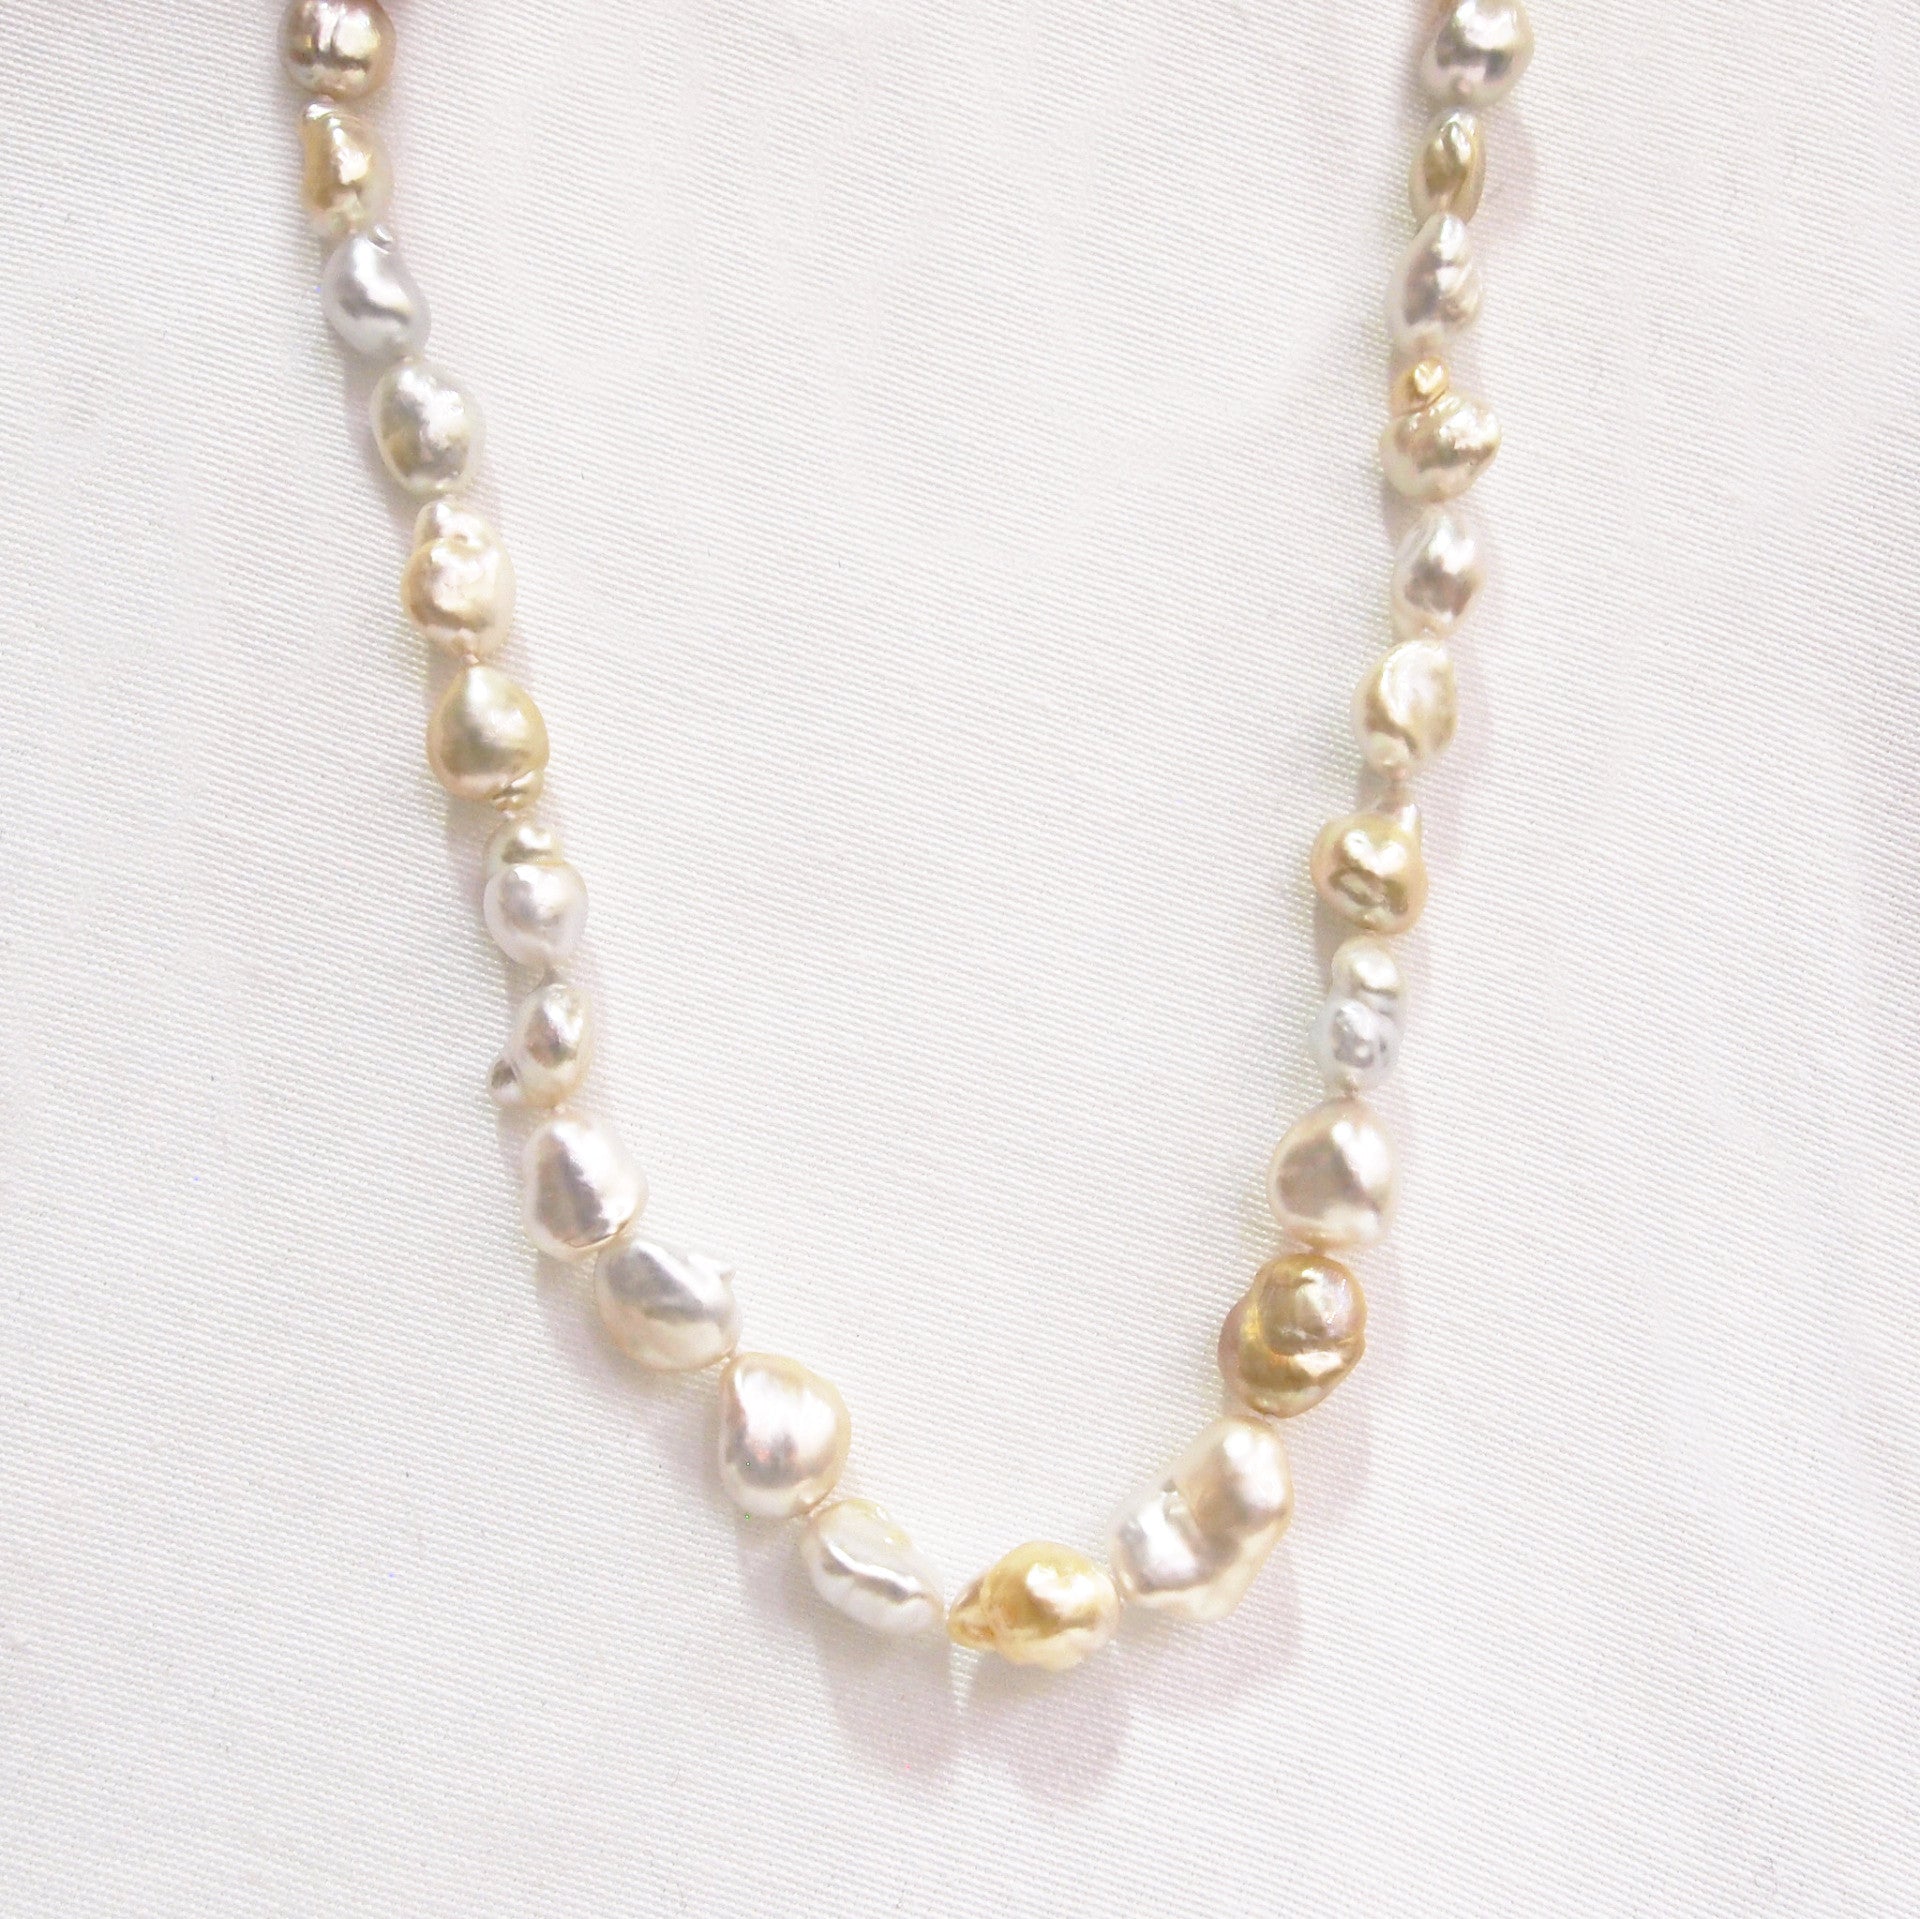 14K White Gold Keshi Pearl Necklace